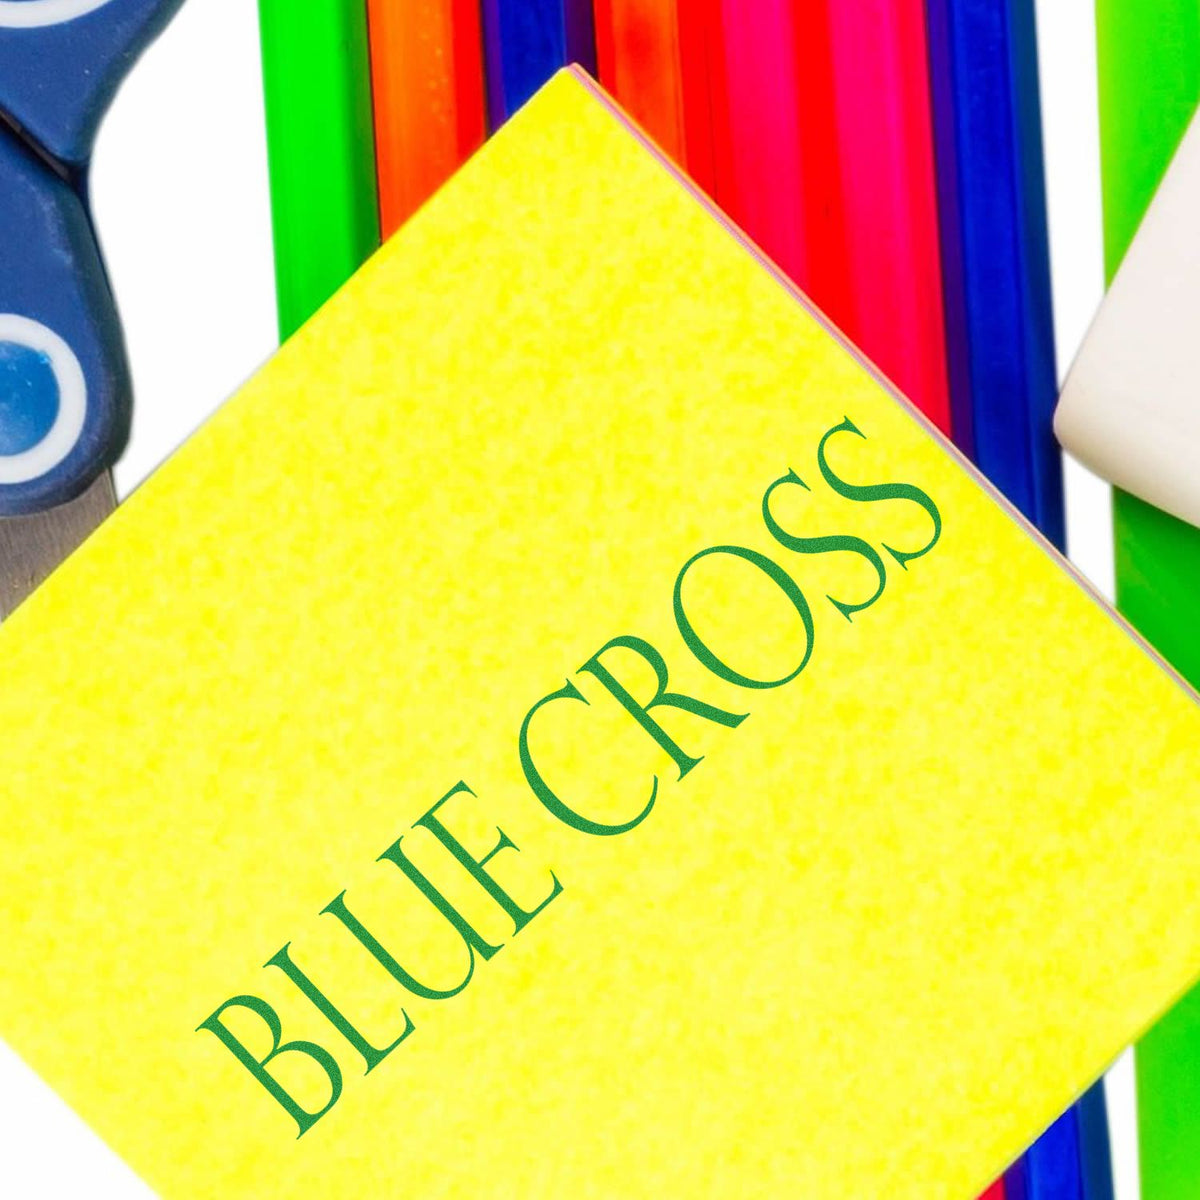 Blue Cross Rubber Stamp In Use